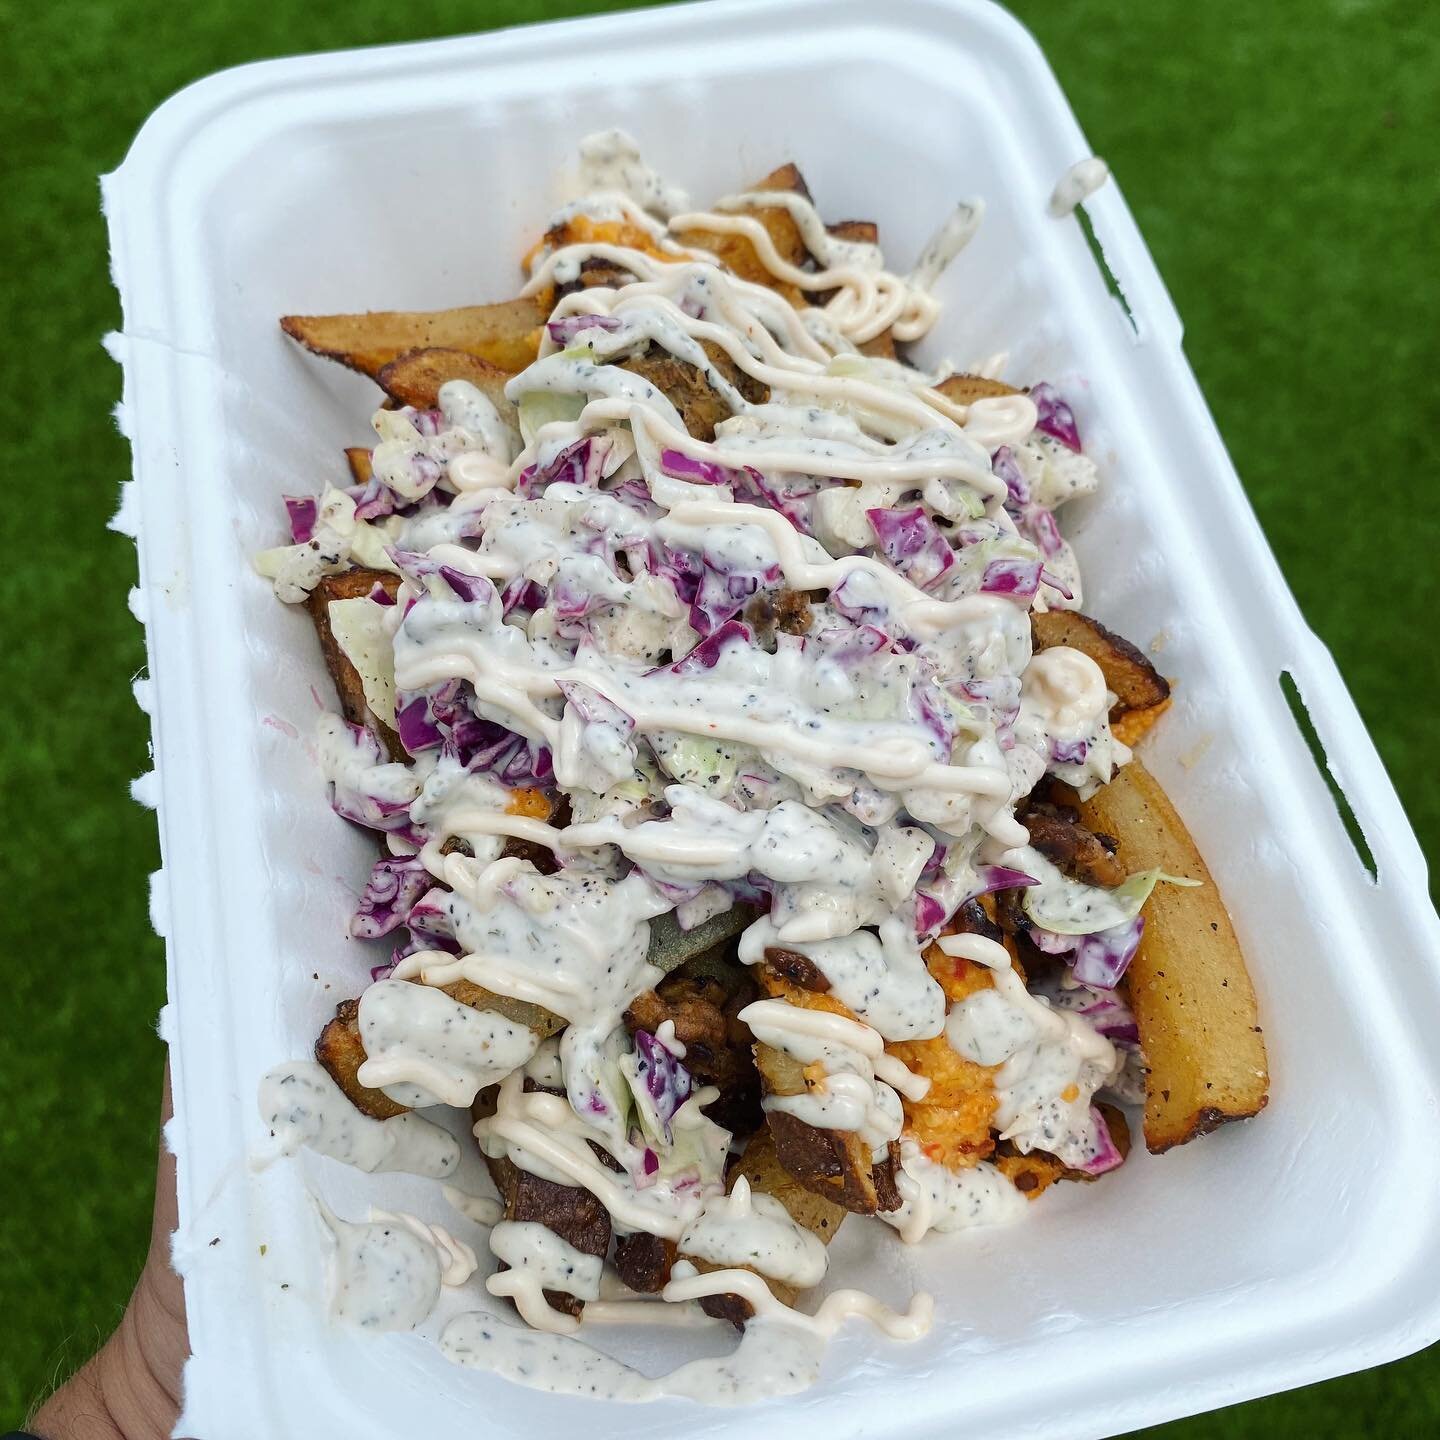 Have you tried our Bacun Chedda Fries? It all starts with fresh whole organic russet potatoes that we cut by hand in our kitchen. Then we top them with our house-made chedda, tempeh bacun, and organic cabbage. To top it off we finish with a delightfu